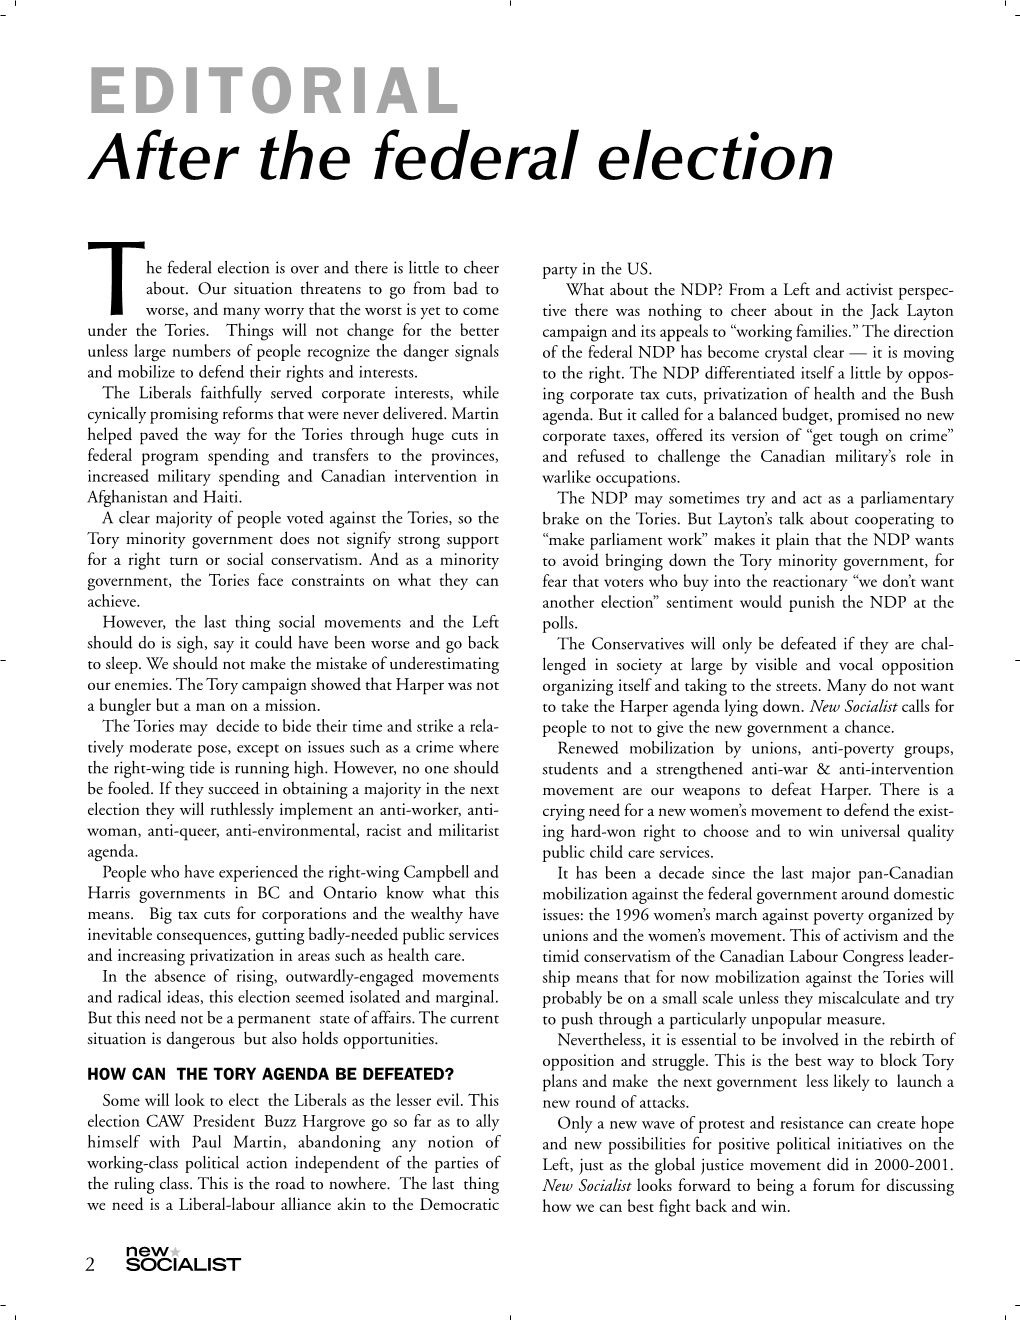 EDITORIAL After the Federal Election